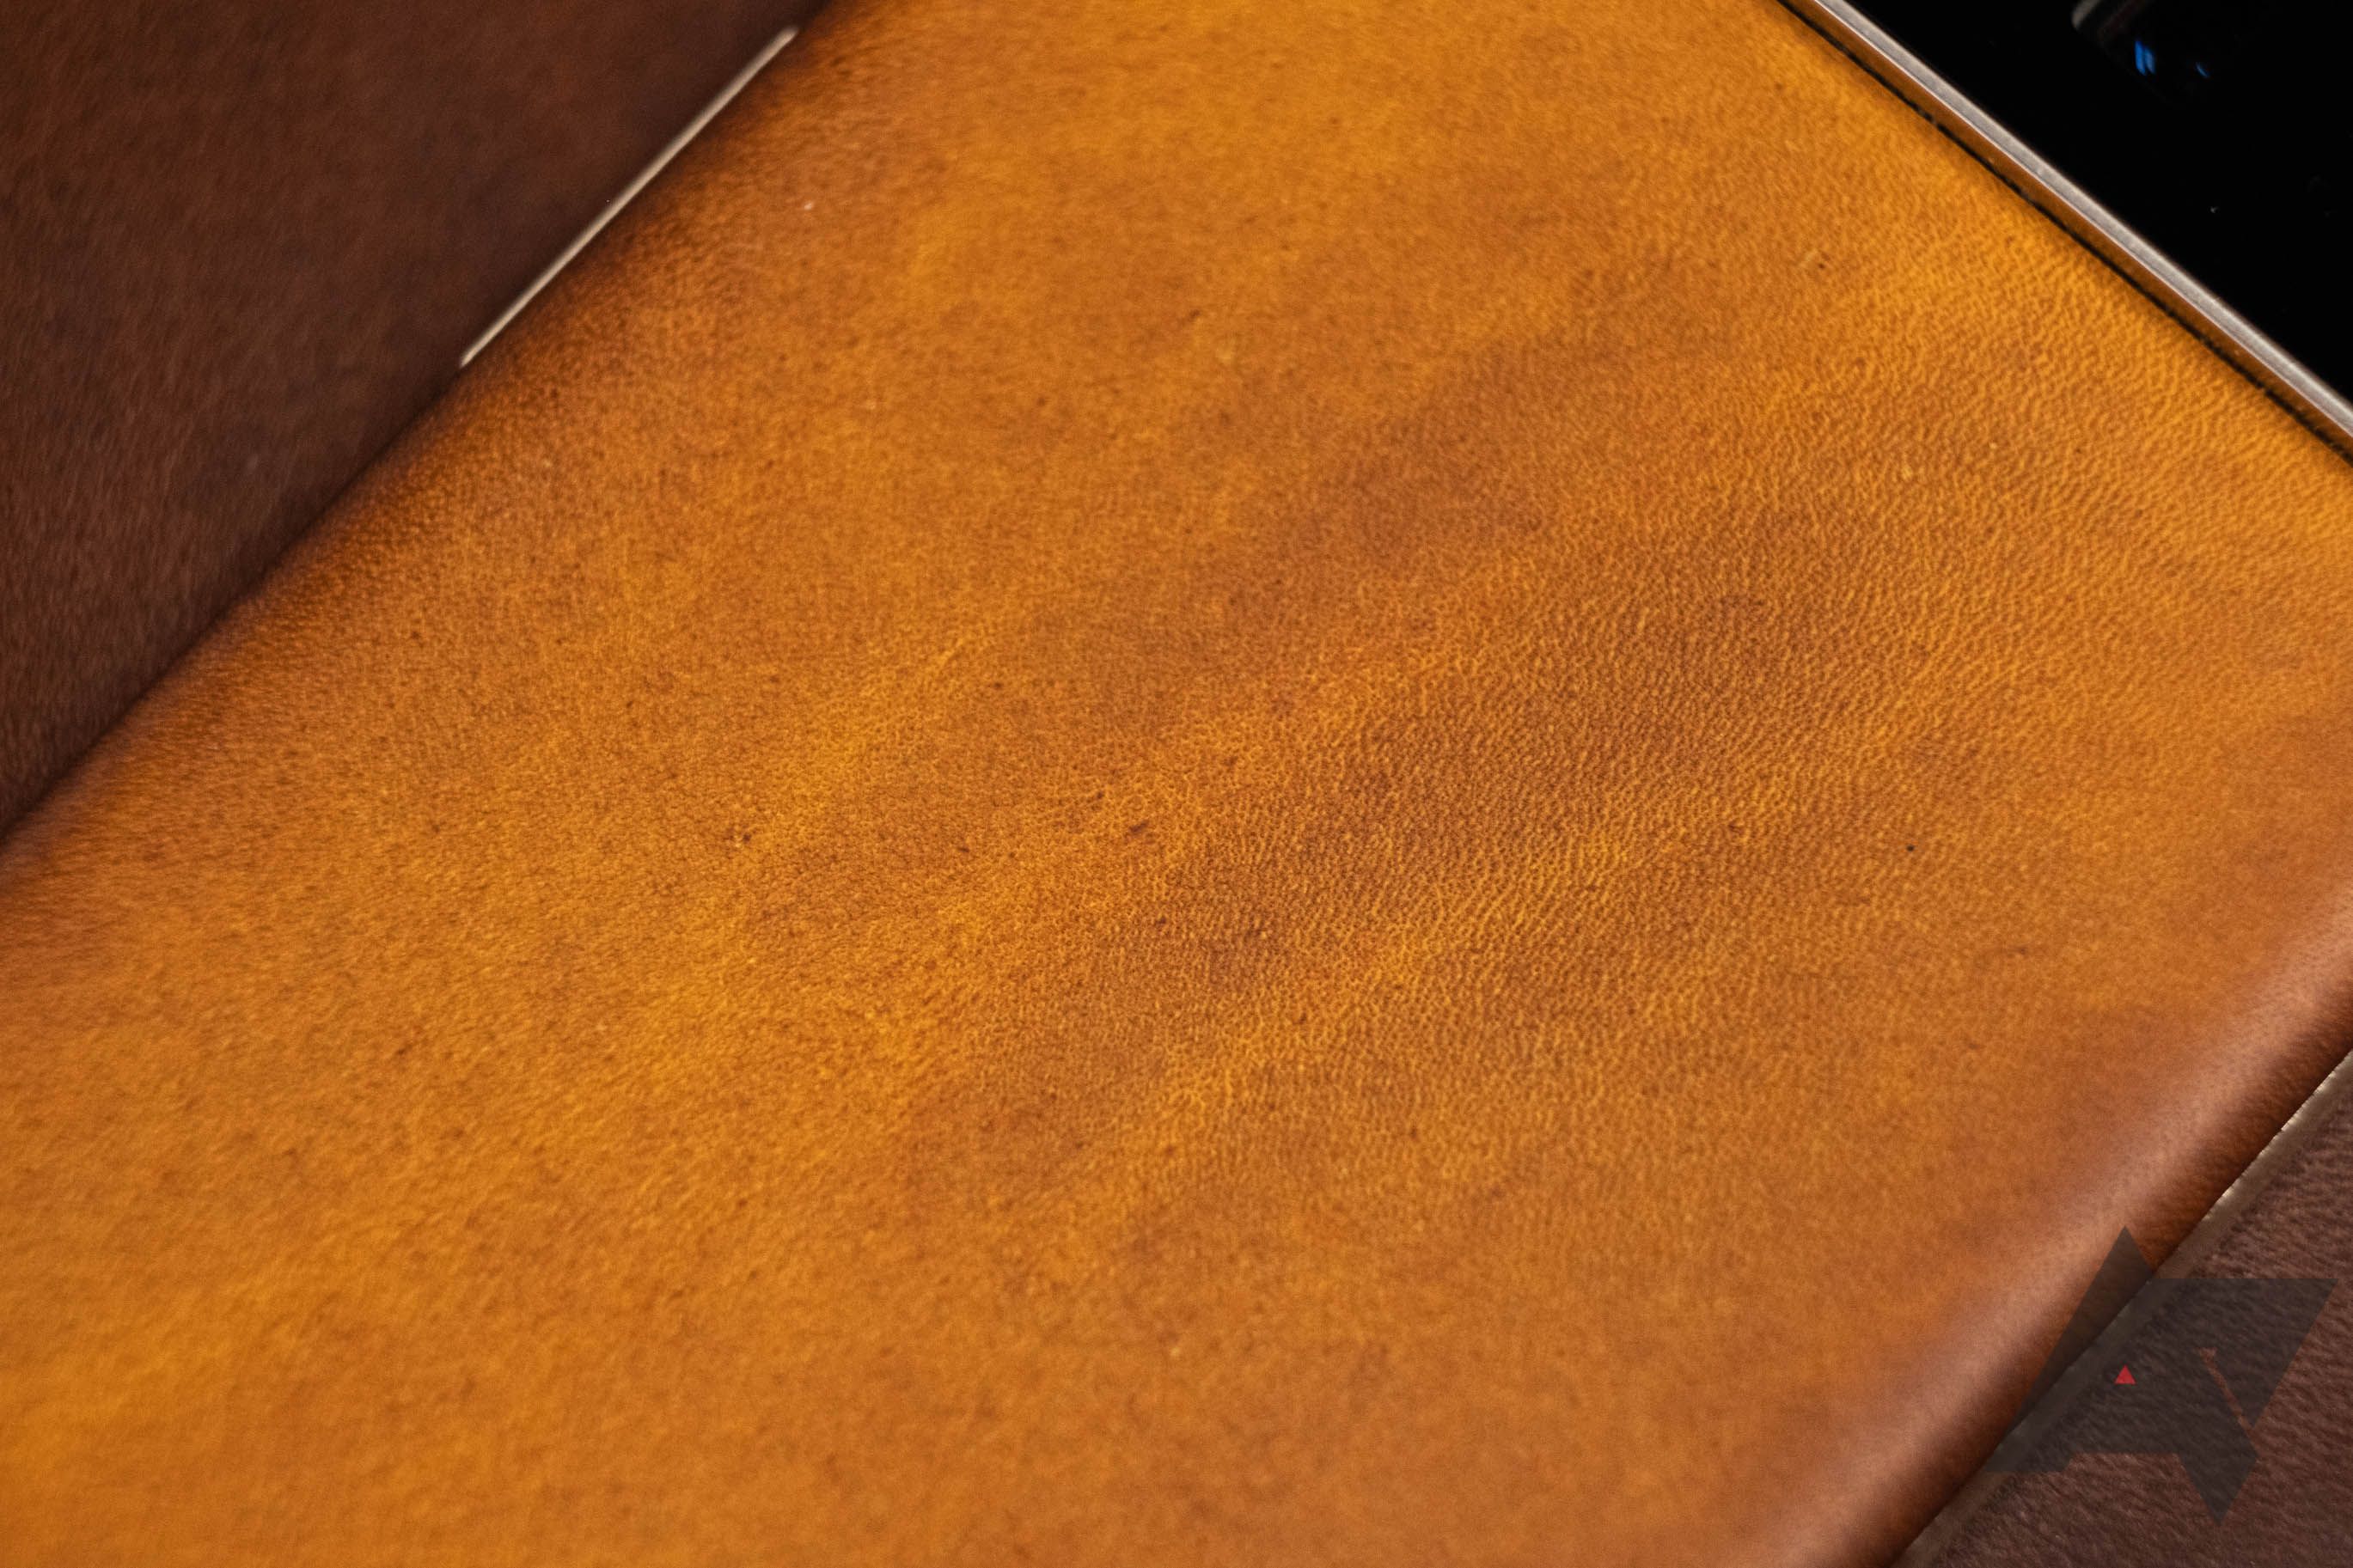 dbrand leather skin review2